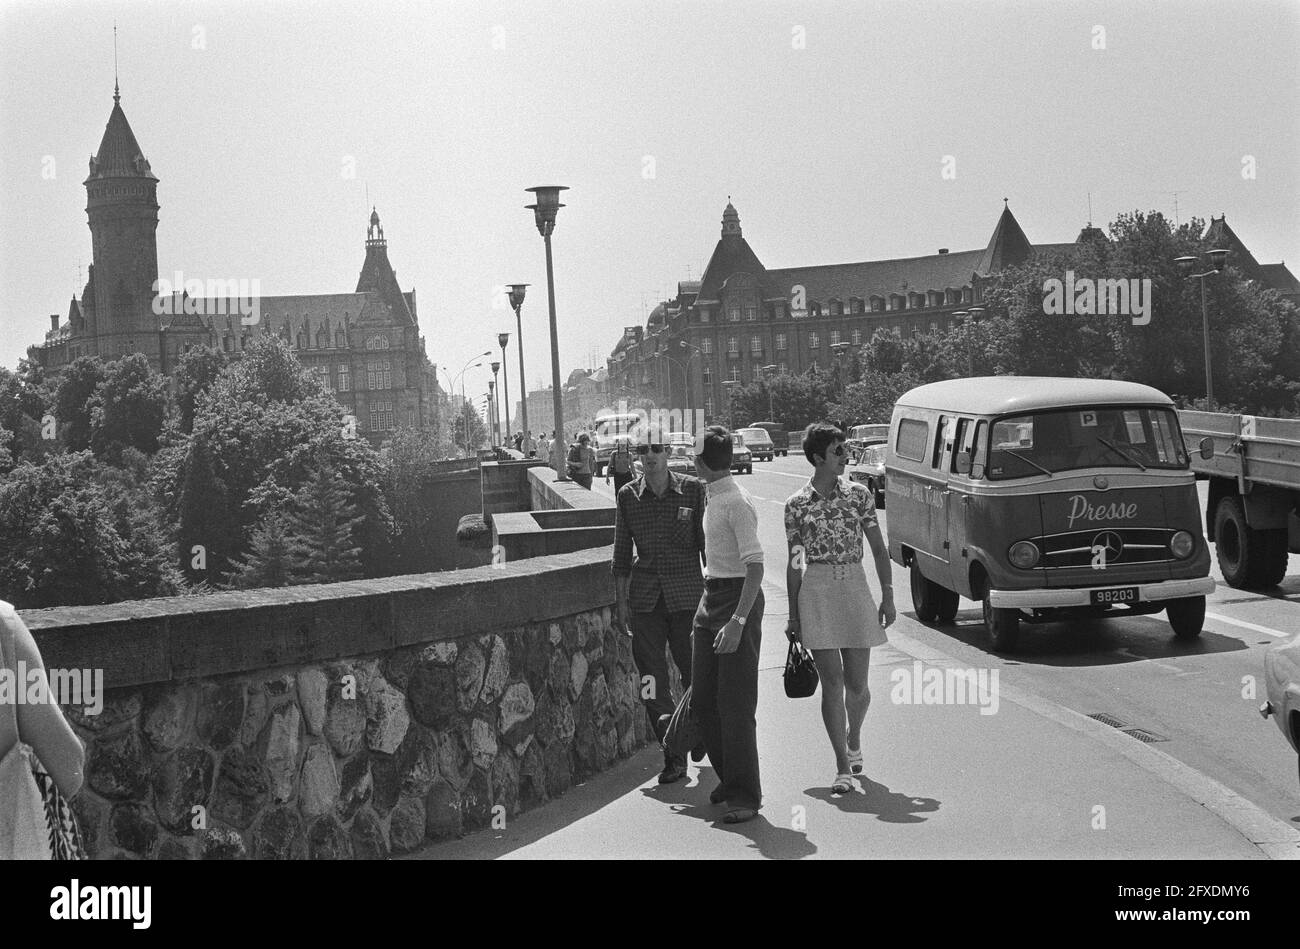 Cityscapes Luxembourg, nos. 8, 10, 11 Vallee de la Petrusse, no. 9 Pont Adolphe, July 7, 1971, Cityscapes, The Netherlands, 20th century press agency photo, news to remember, documentary, historic photography 1945-1990, visual stories, human history of the Twentieth Century, capturing moments in time Stock Photo